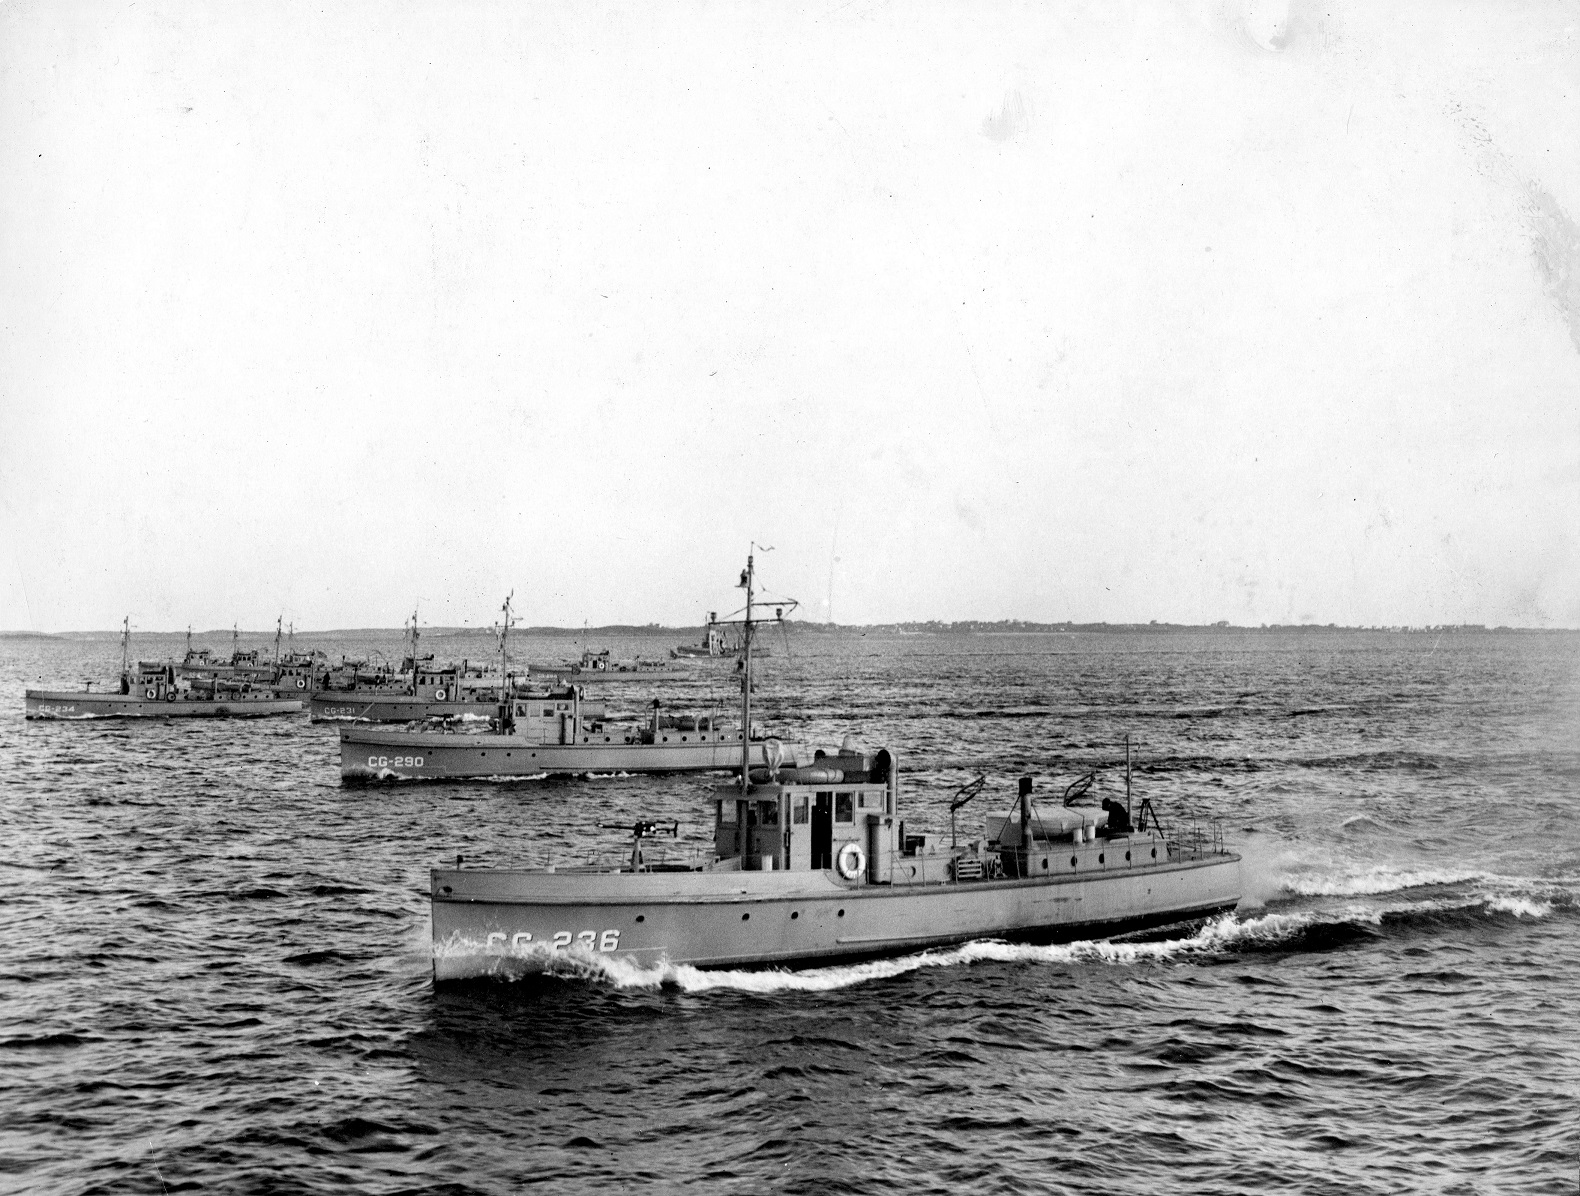 Chief Commissaryman Robert Manges’s first assignment as a cook was a 75-foot “Six bitter” patrol boat out of Morehead City, North Carolina. (U.S. Coast Guard)